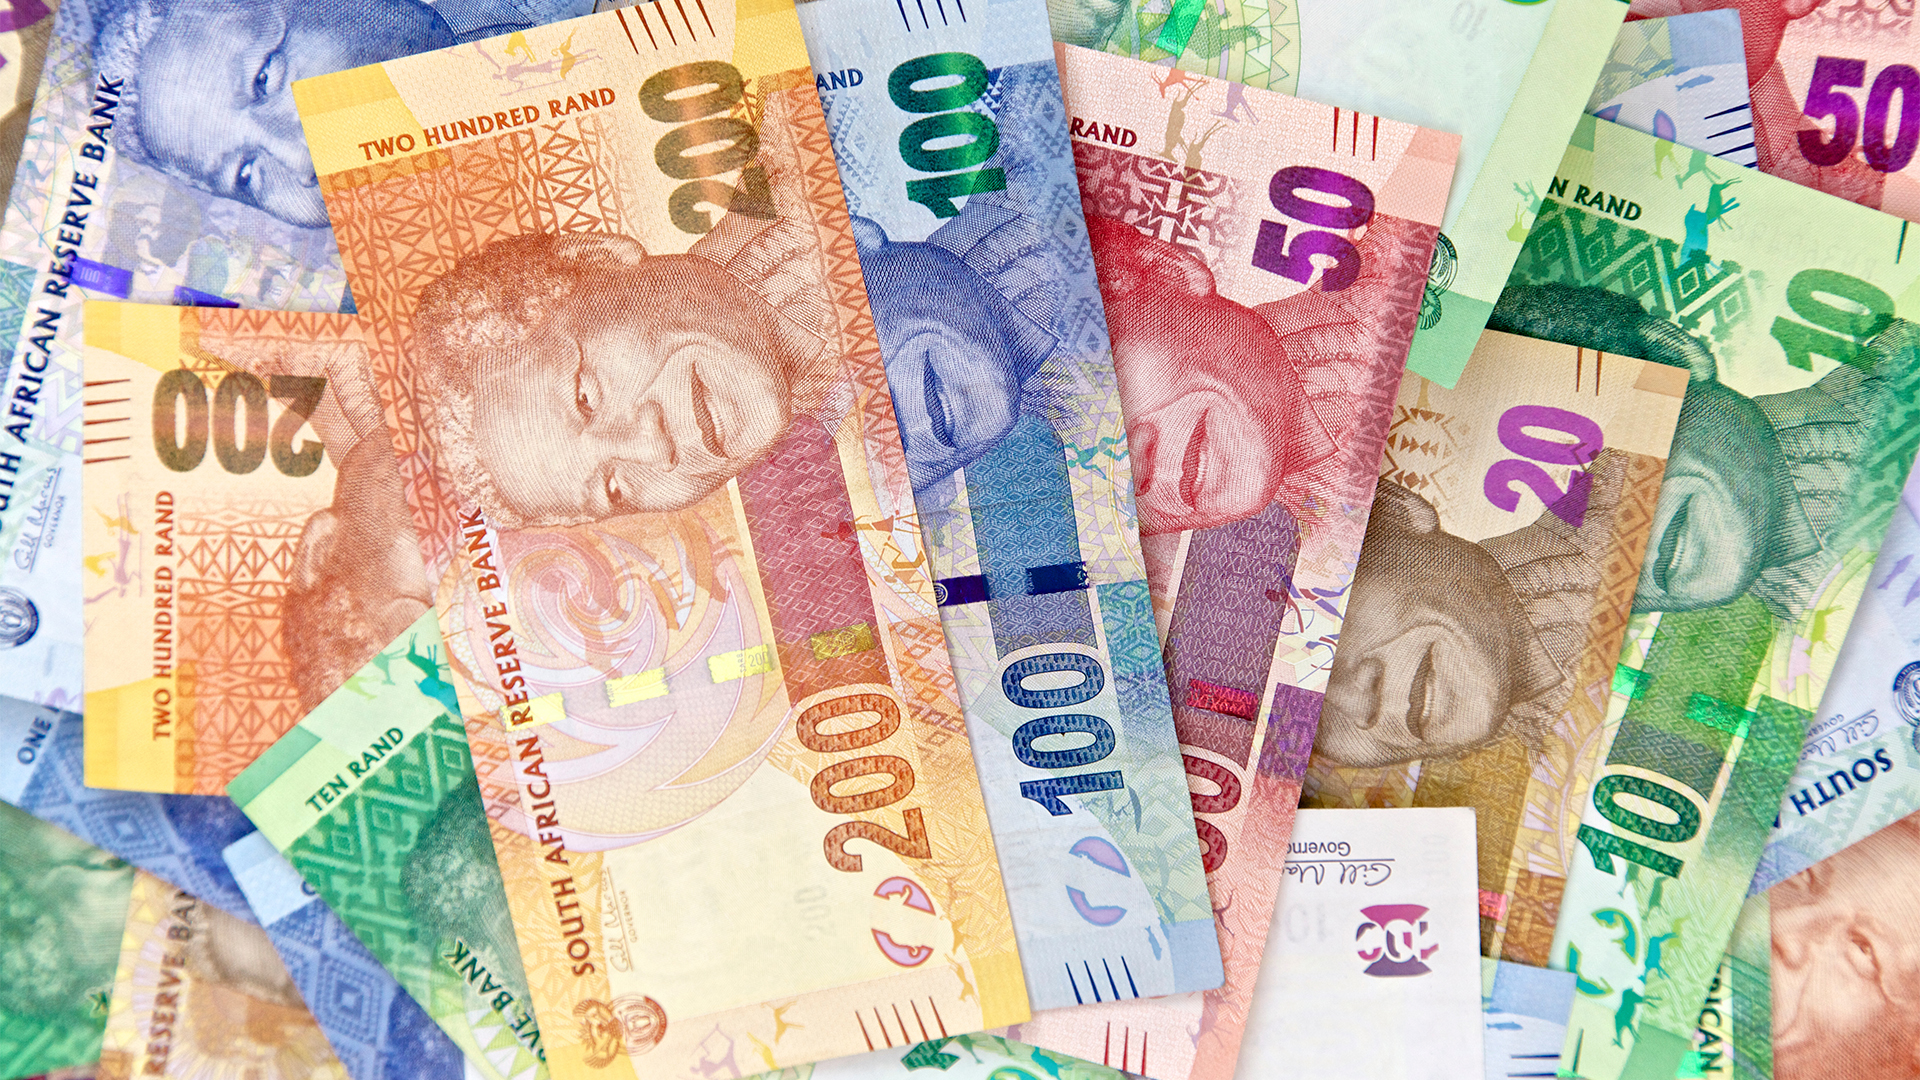 South African, Rands